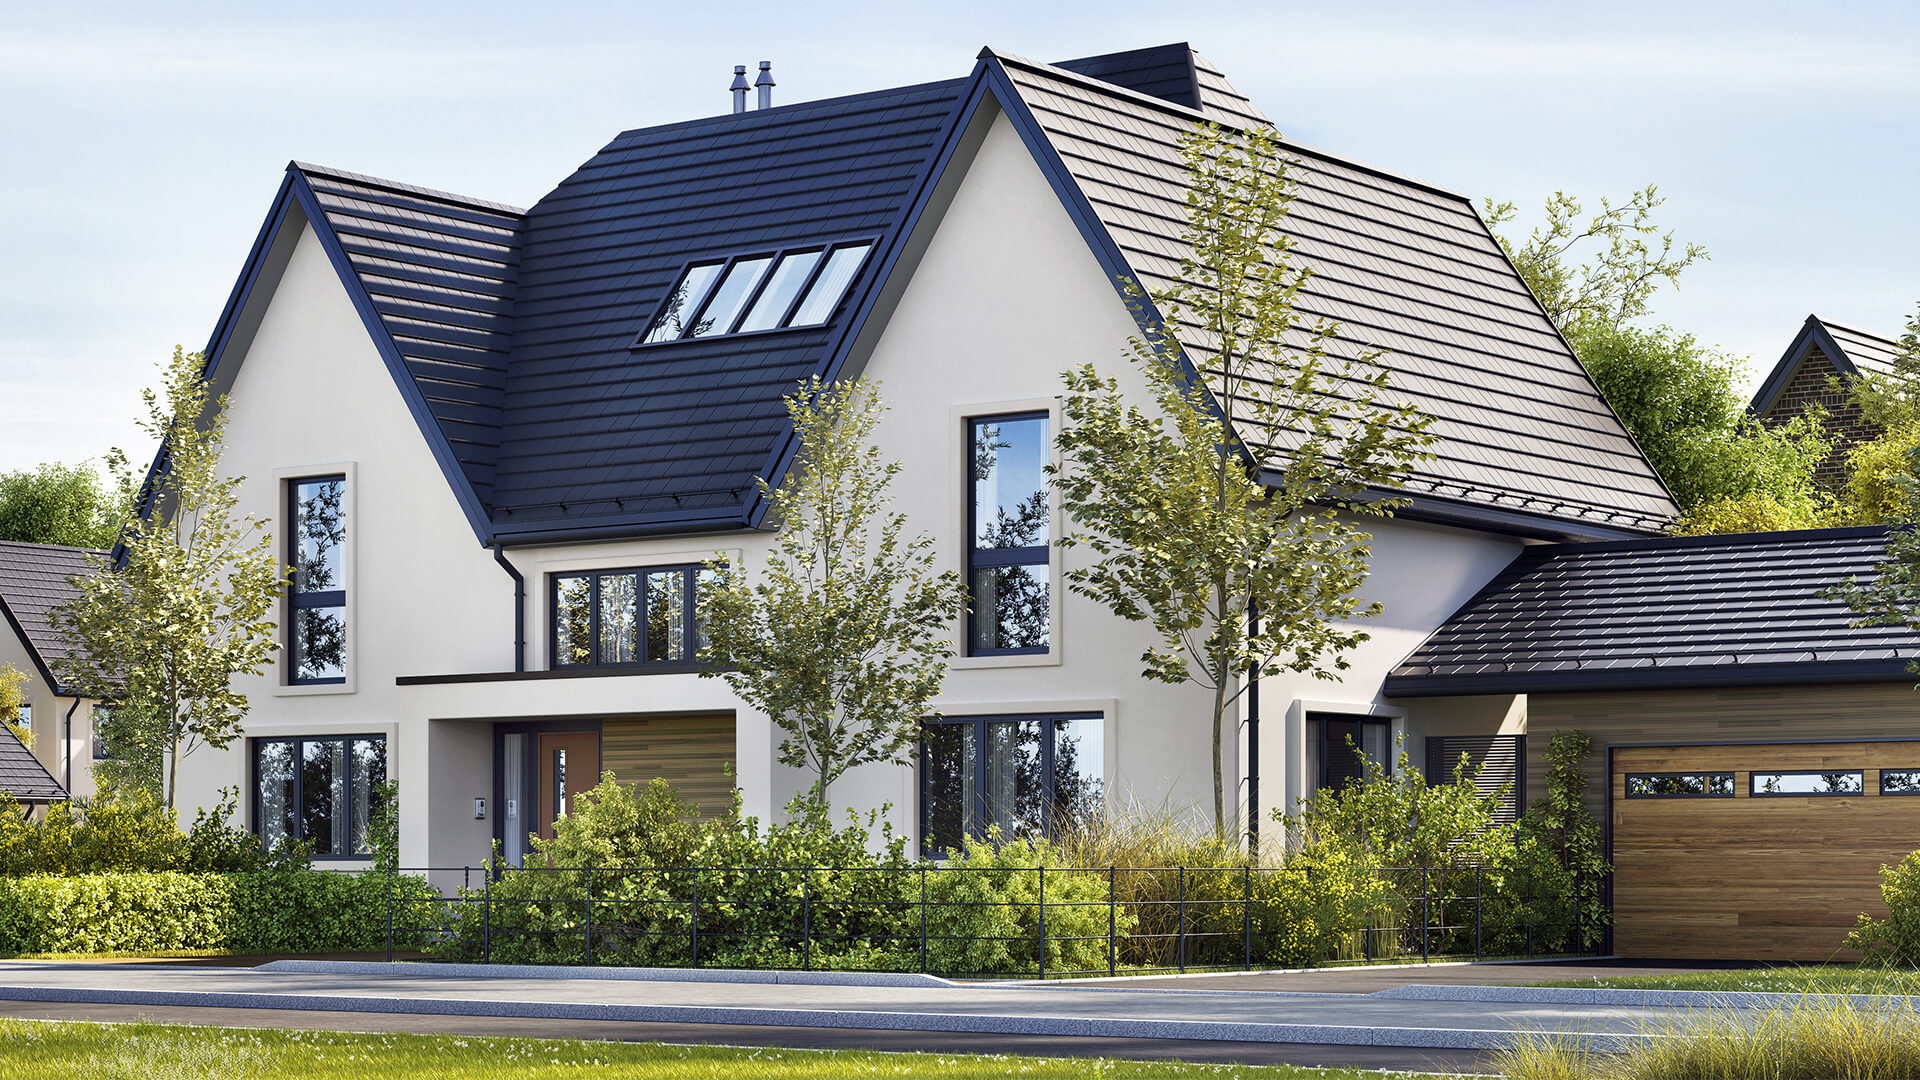 New-Build Homes: 7 Things You May Not Know - Build Magazine